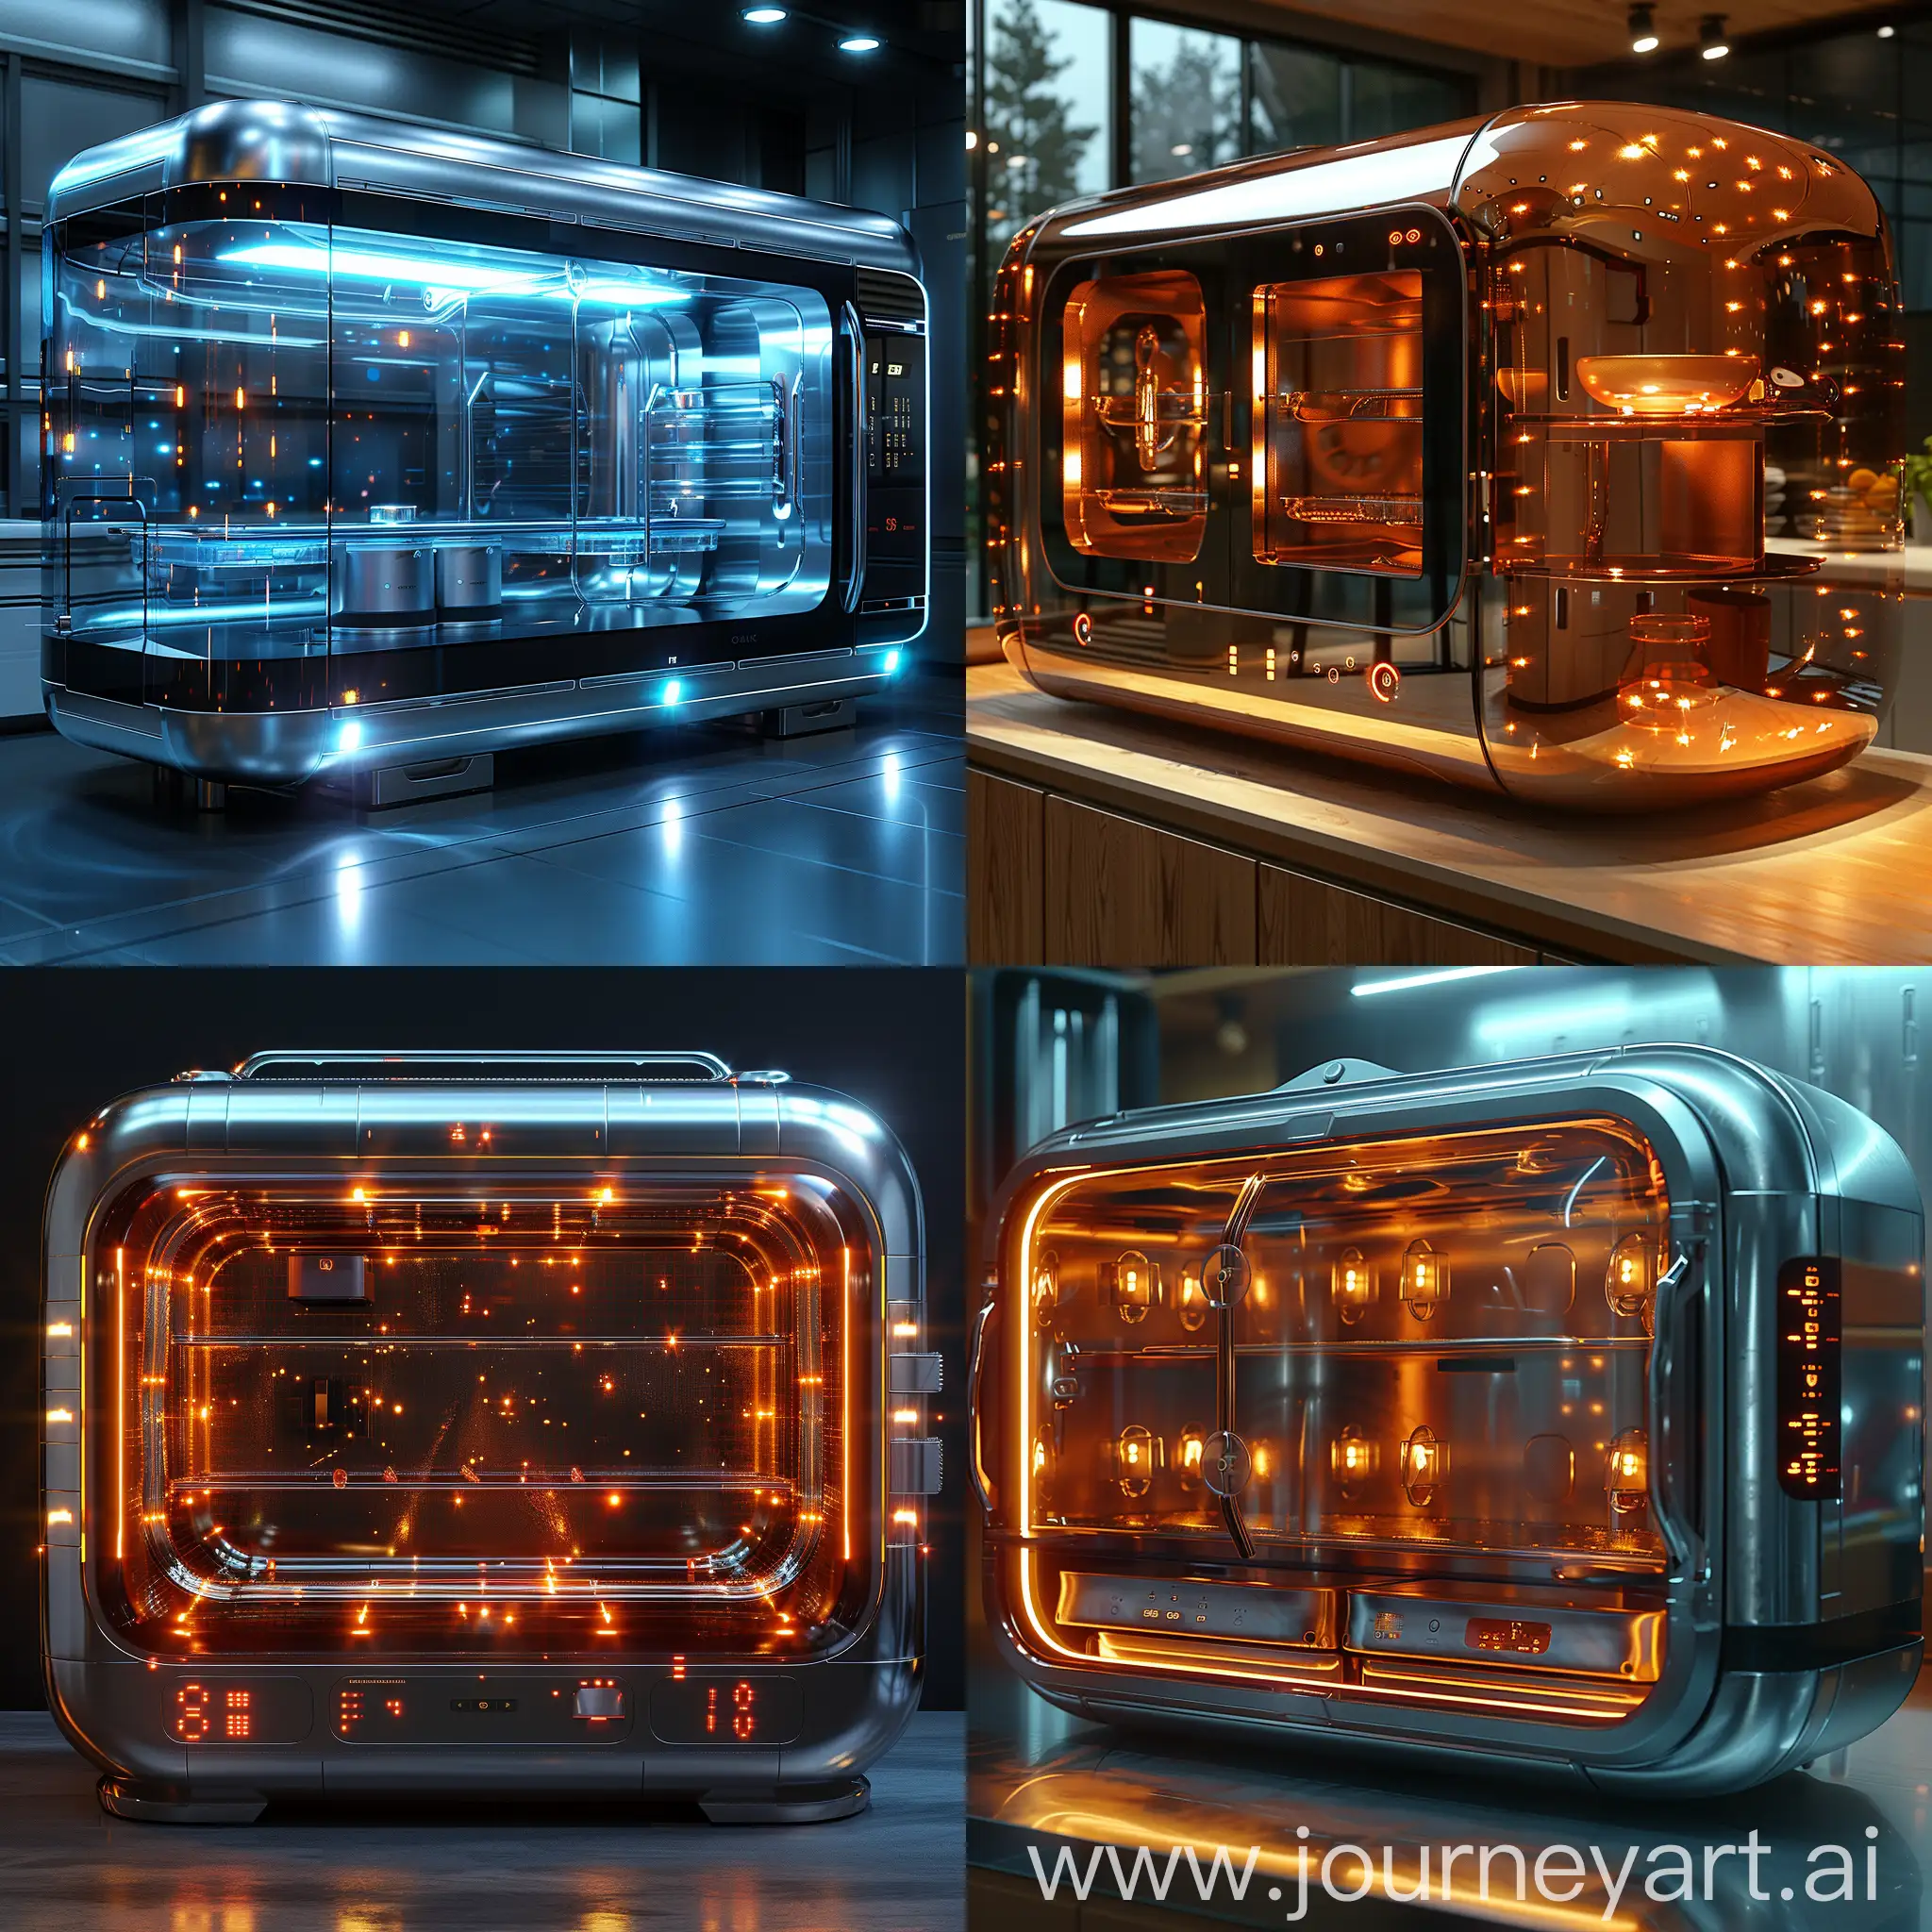 Futuristic-Microwave-with-Stainless-Steel-and-Transparent-Smart-Materials